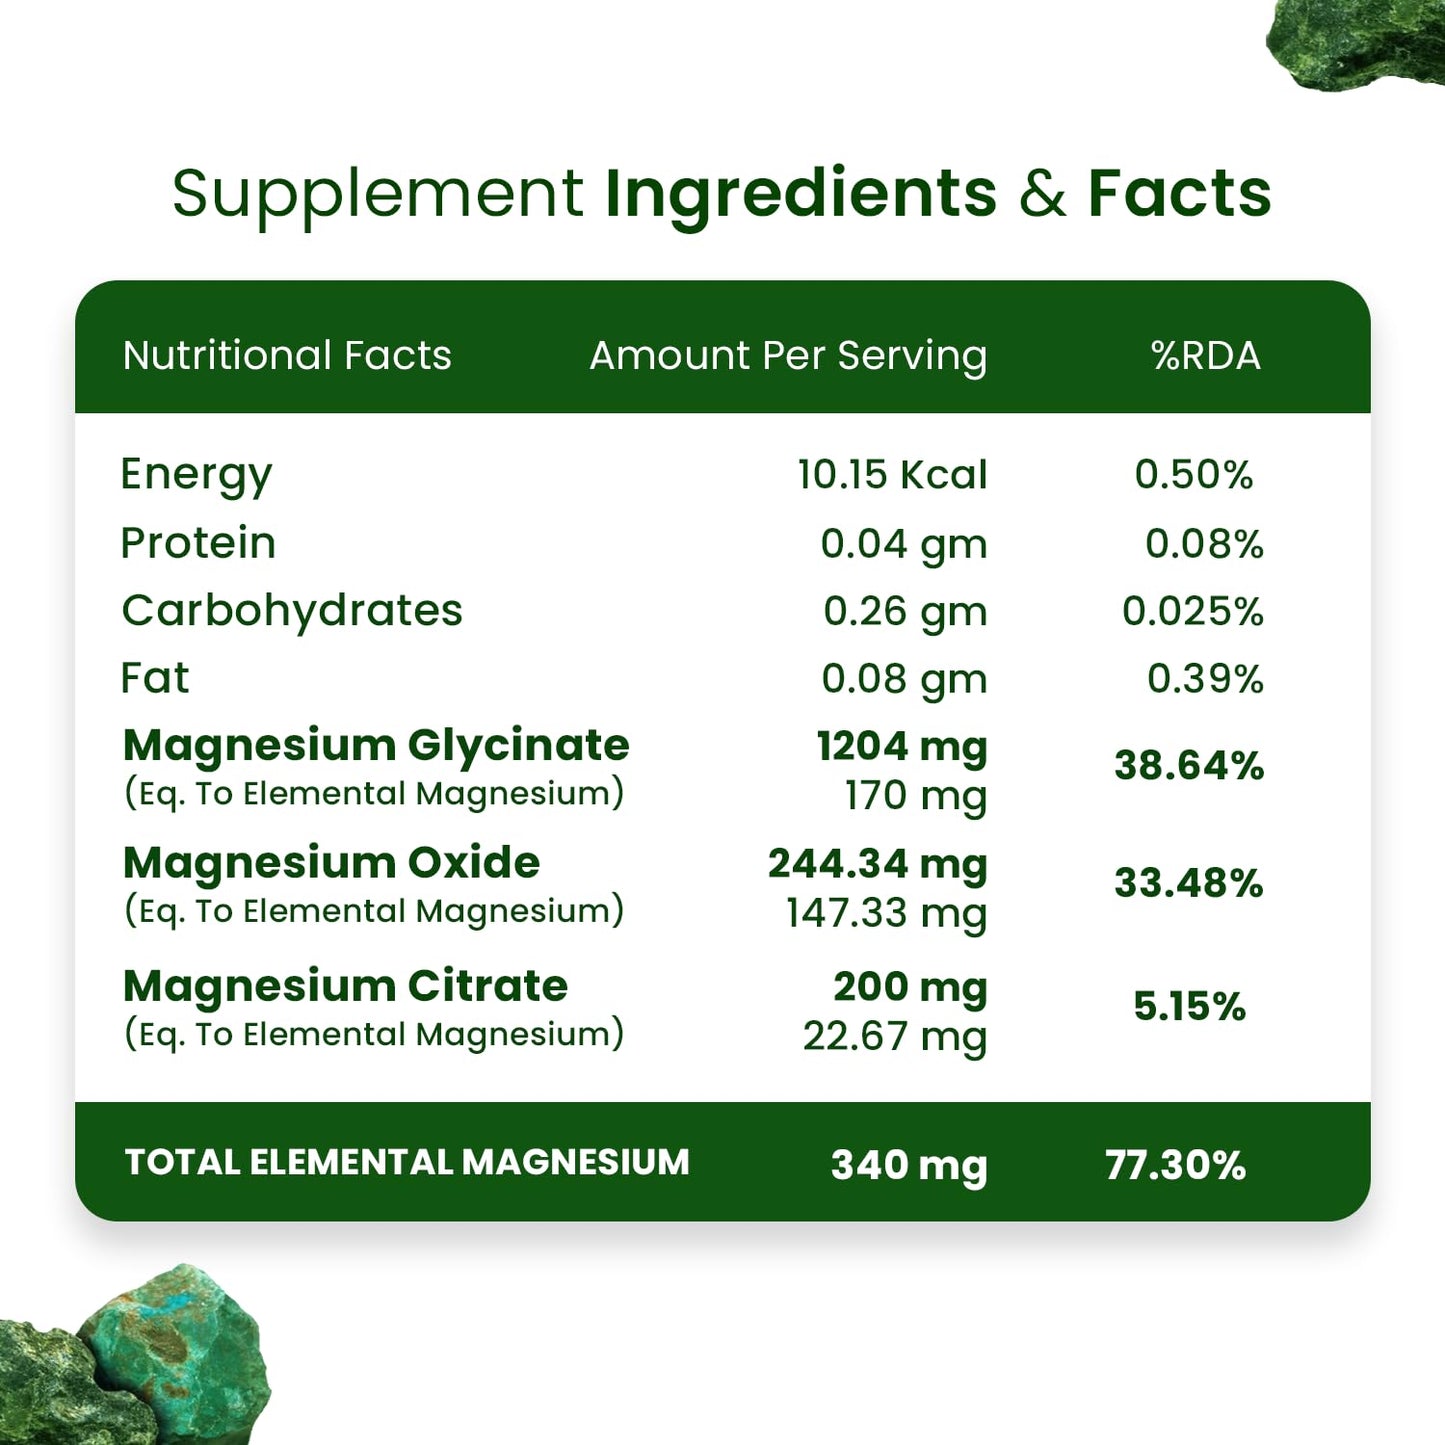 Himalayan Organics Magnesium Complex Supplement | 1648mg | with Magnesium Glycinate, Magnesium Citrate, Magnesium Oxide - 120 Veg Tablets